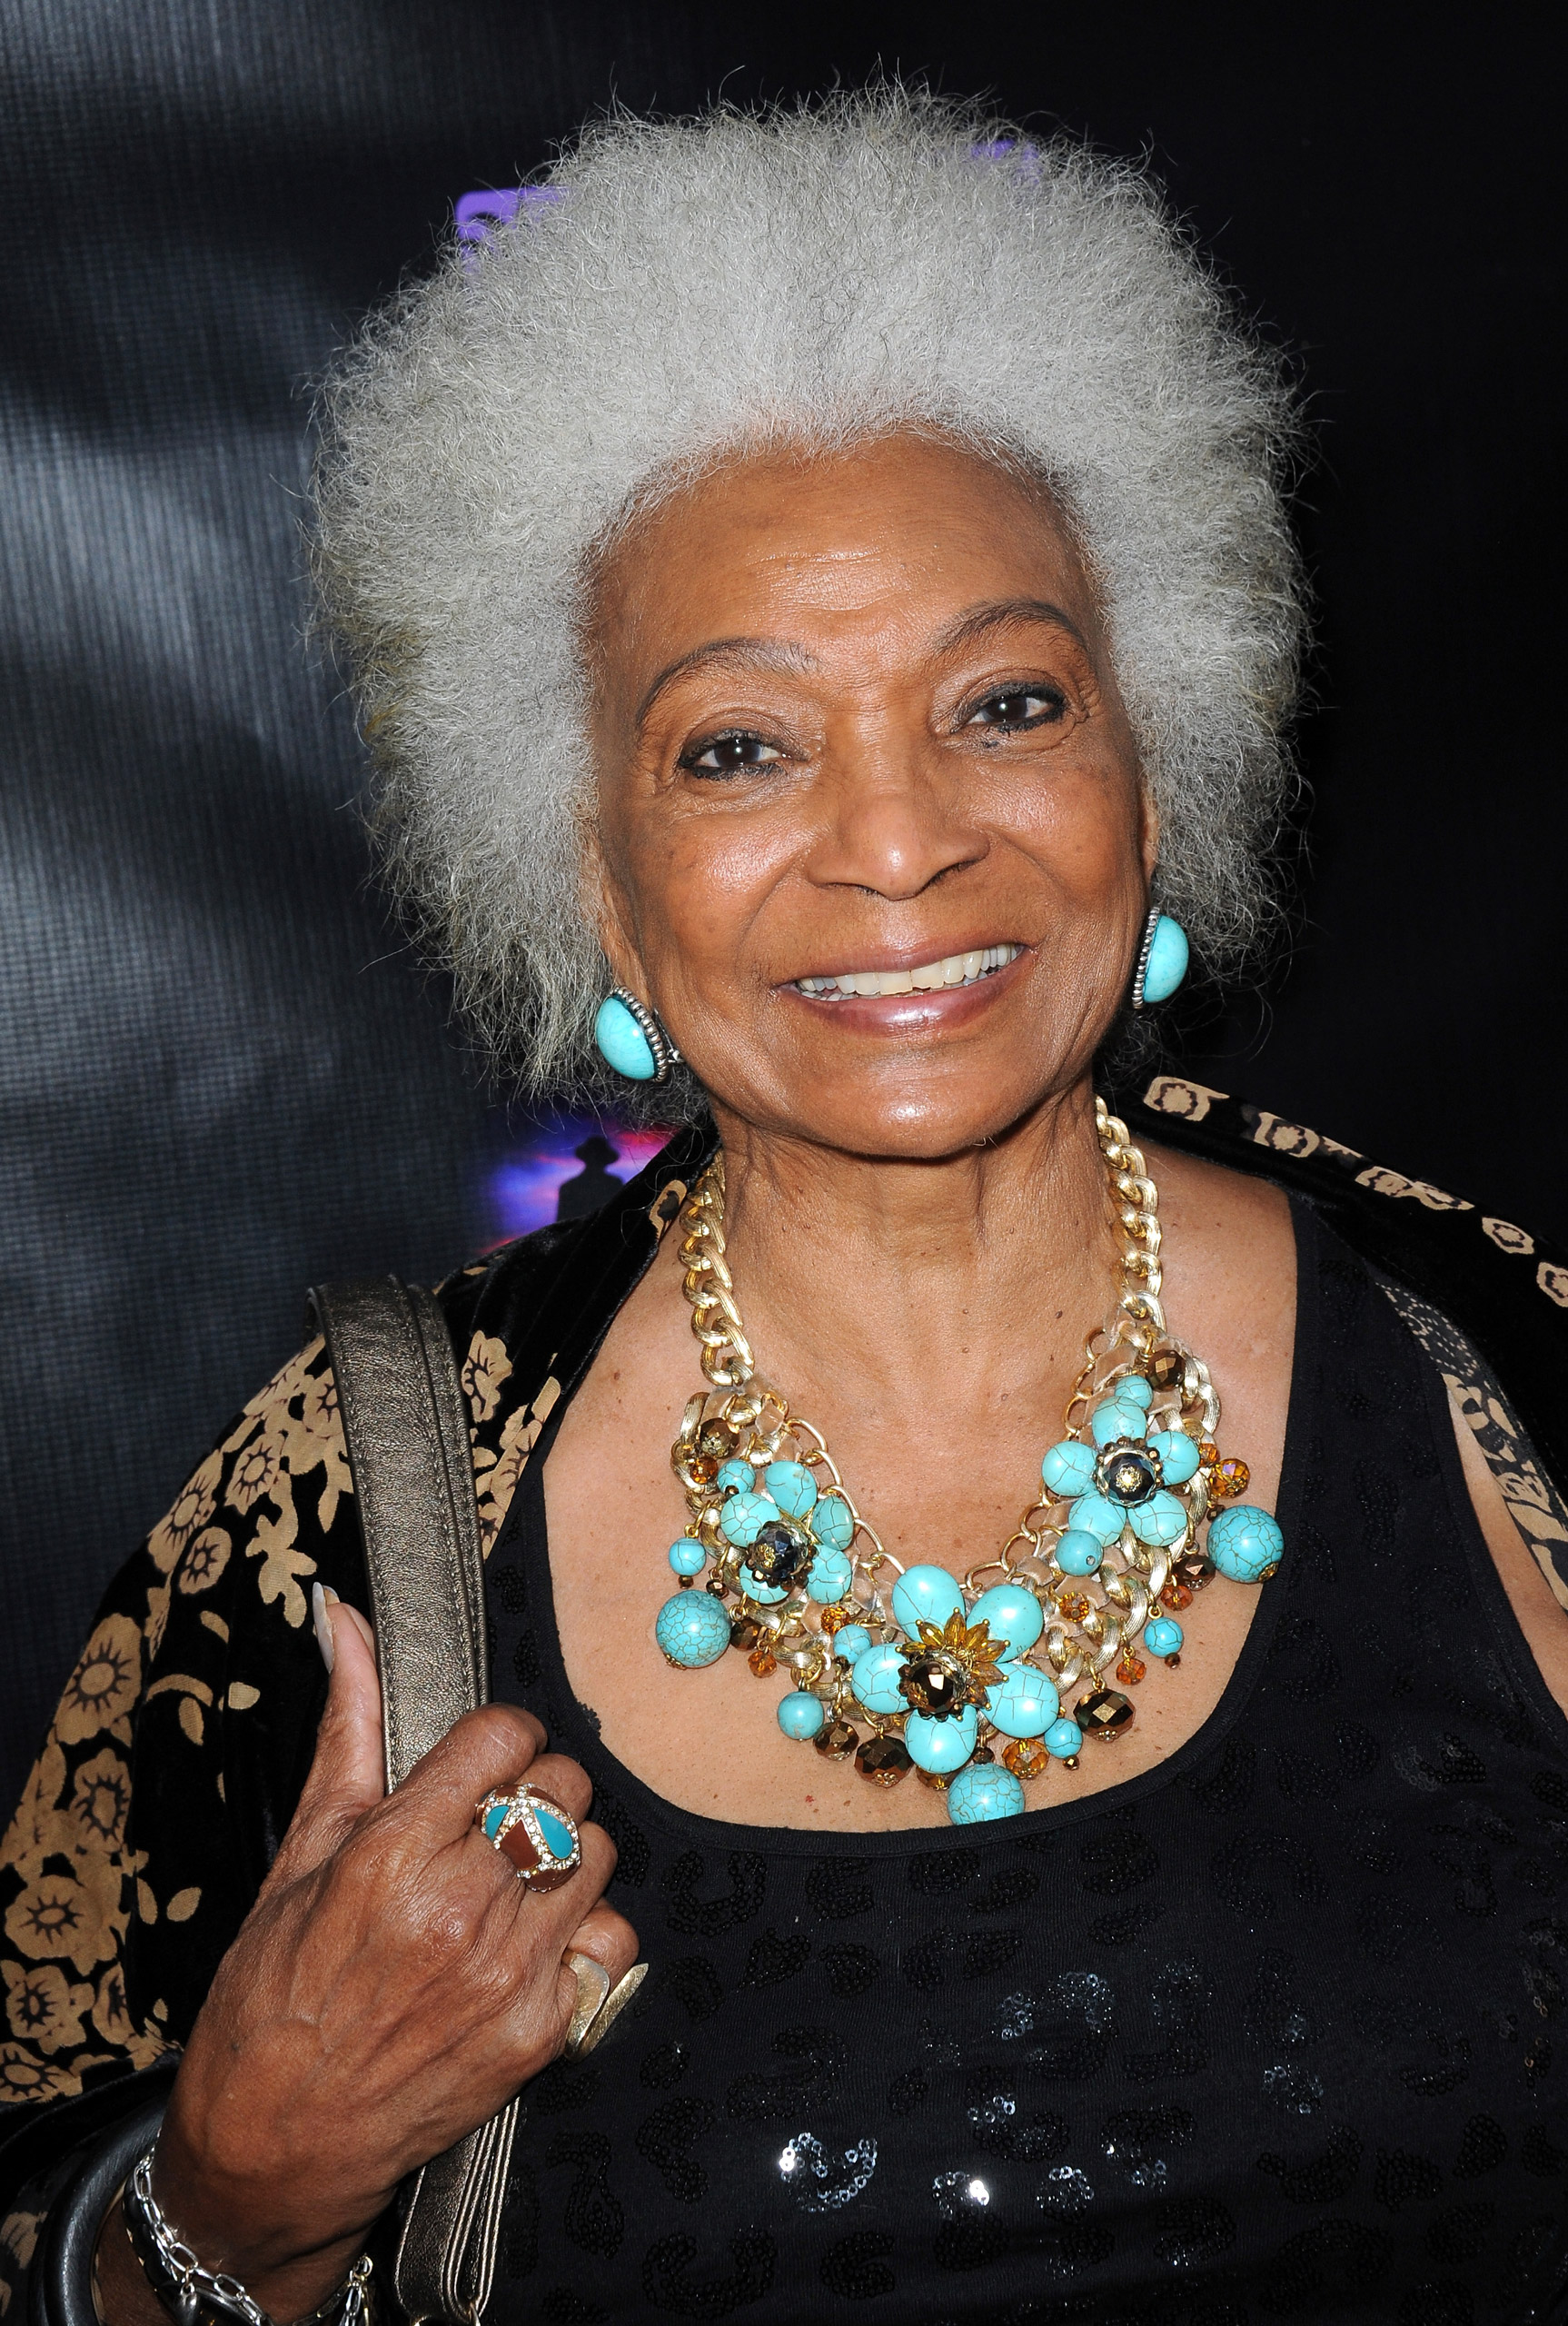 GLENDALE, CA - APRIL 15: Actress Nichelle Nichols attends the Malcolm McDowell Series Of Q&A Screenings for "Star Trek: Generations" Presented by Prospect House Entertainment moderated by Michael Dorn at The Alex Theater on April 15, 2014 in Glendale, California. (Photo by Albert L. Ortega/Getty Images)